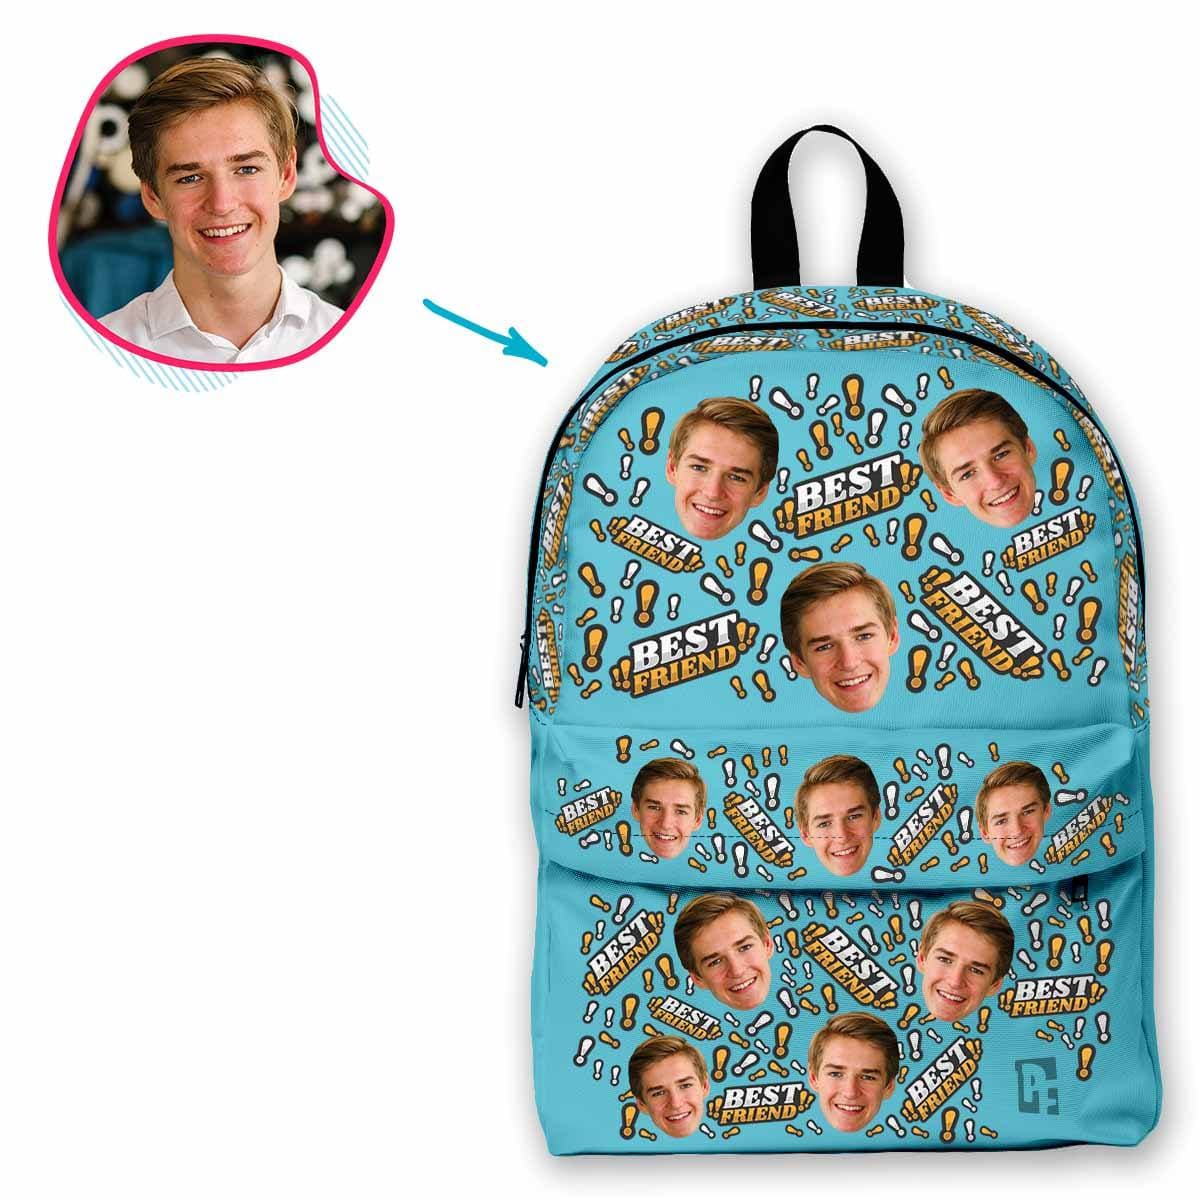 blue Best Friend classic backpack personalized with photo of face printed on it